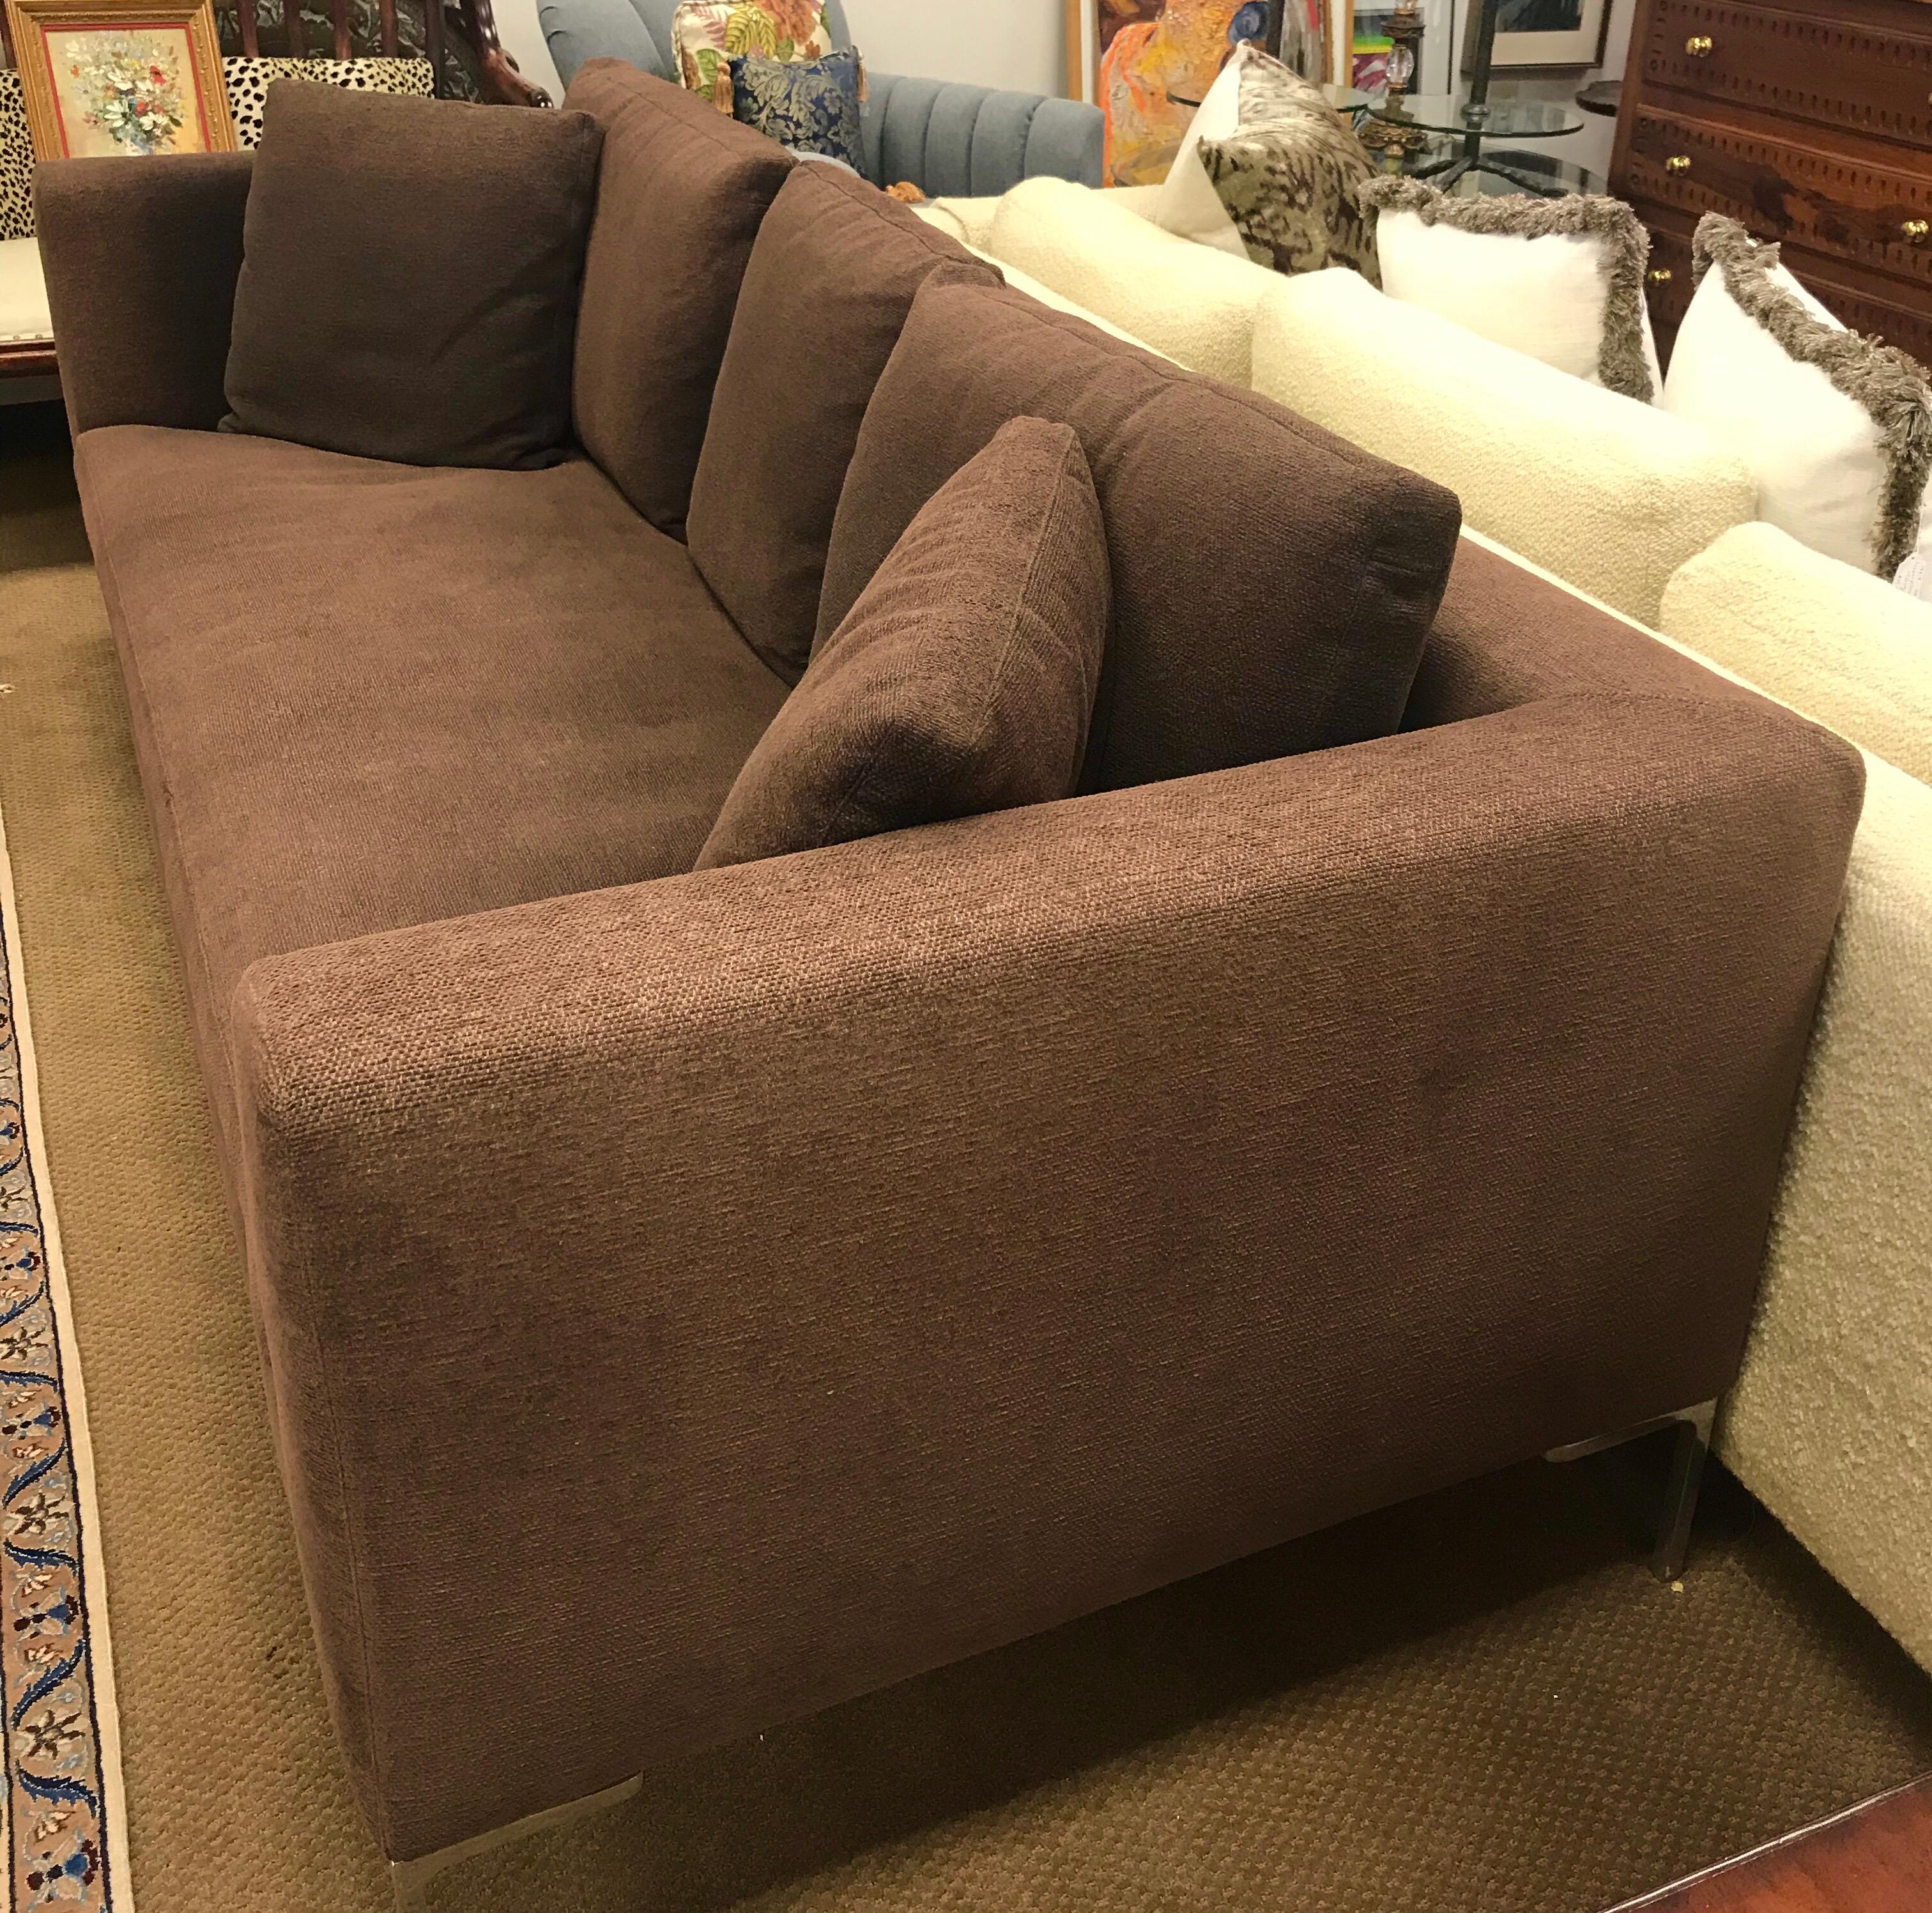 Coveted ninety inch Charles sofa by B&B Italia comes with all paperwork still in folder with piece.
One of B&B Italia's most sought after sofas, it was designed by world renowned designer Antoni Citterio.
The upholstery is a thick brown weave and